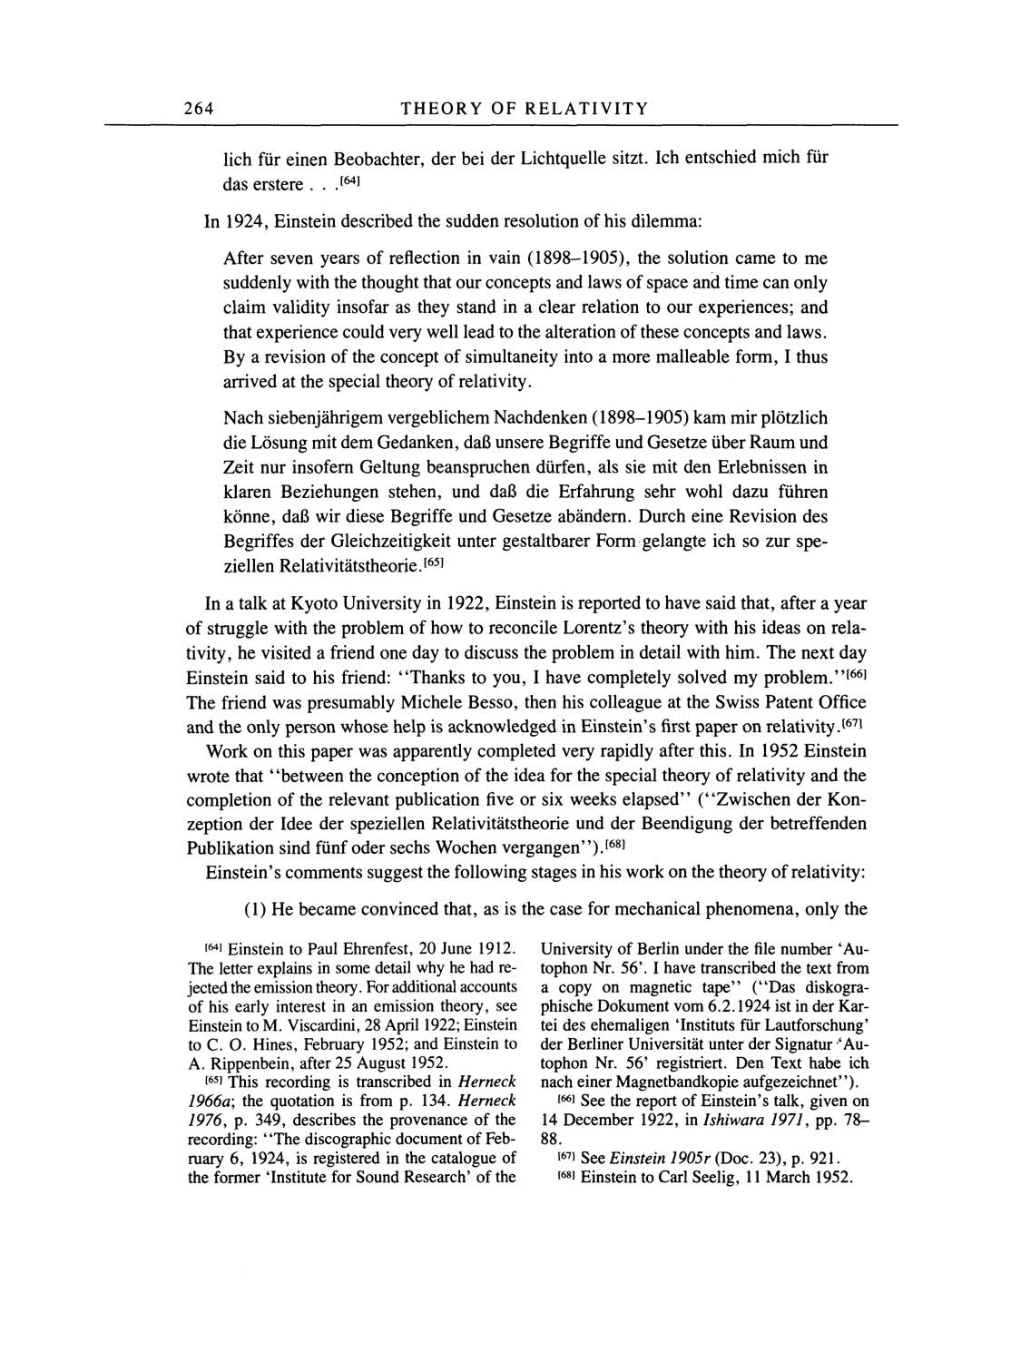 Volume 2: The Swiss Years: Writings, 1900-1909 page 264